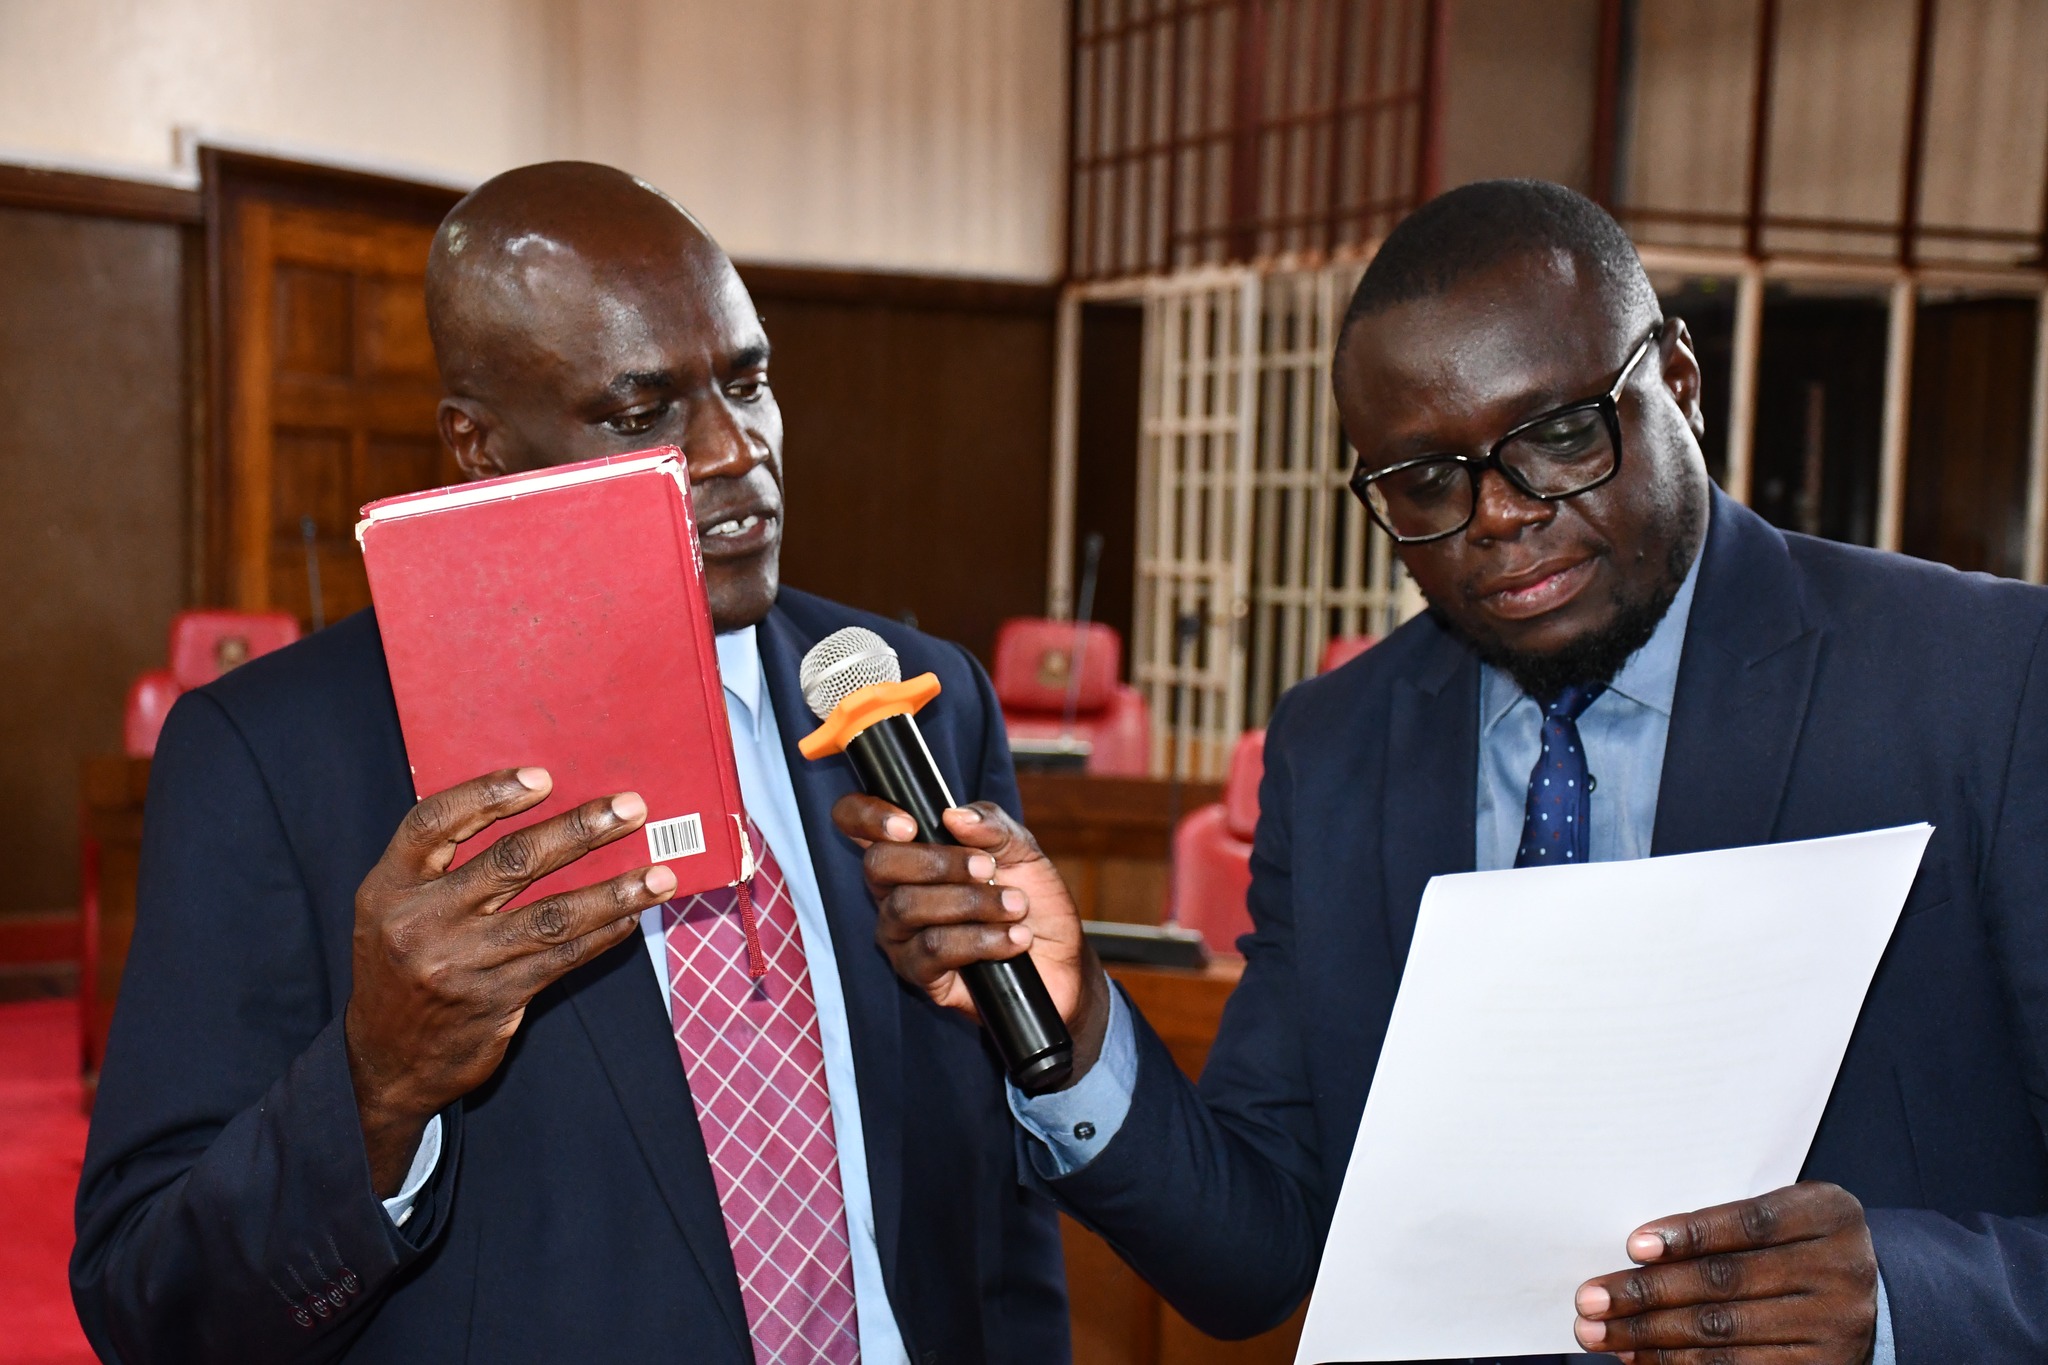 Legal Council administering an Orth to one of the nominee, during the vetting process